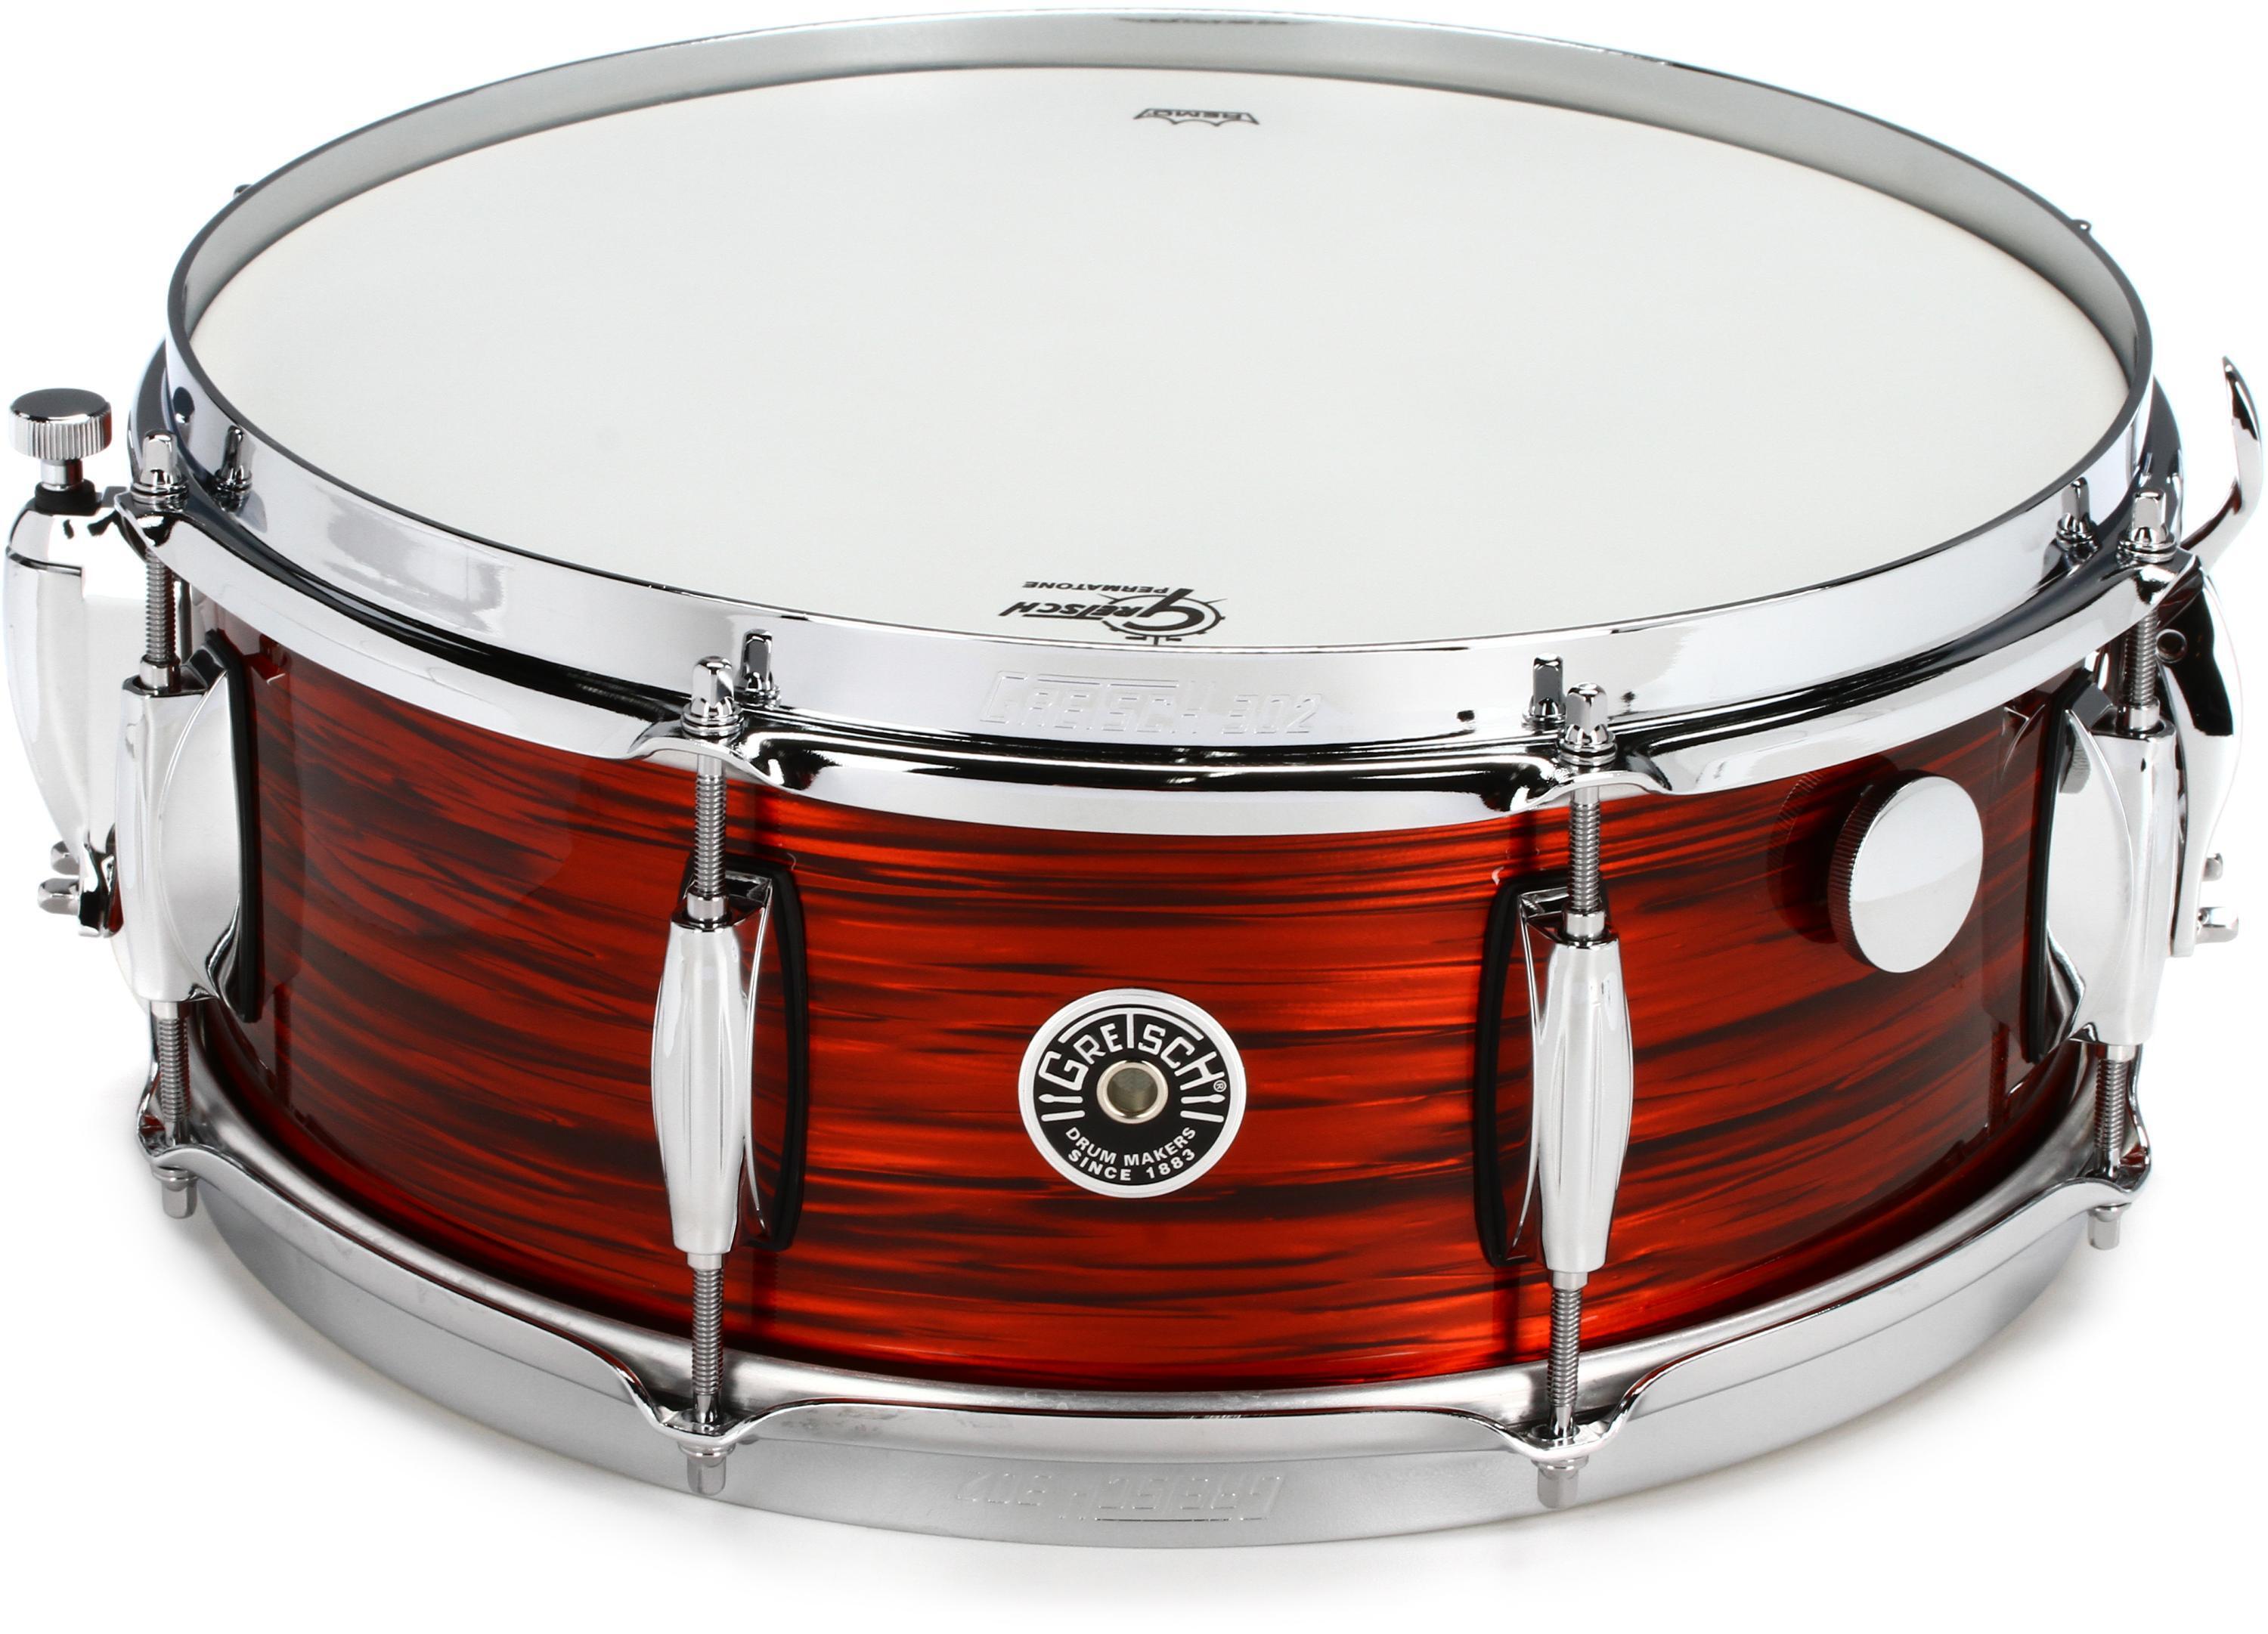 Gretsch Drums Brooklyn Series Snare Drum - 5.5 x 14-inch - Orange Oyster -  Sweetwater Exclusive